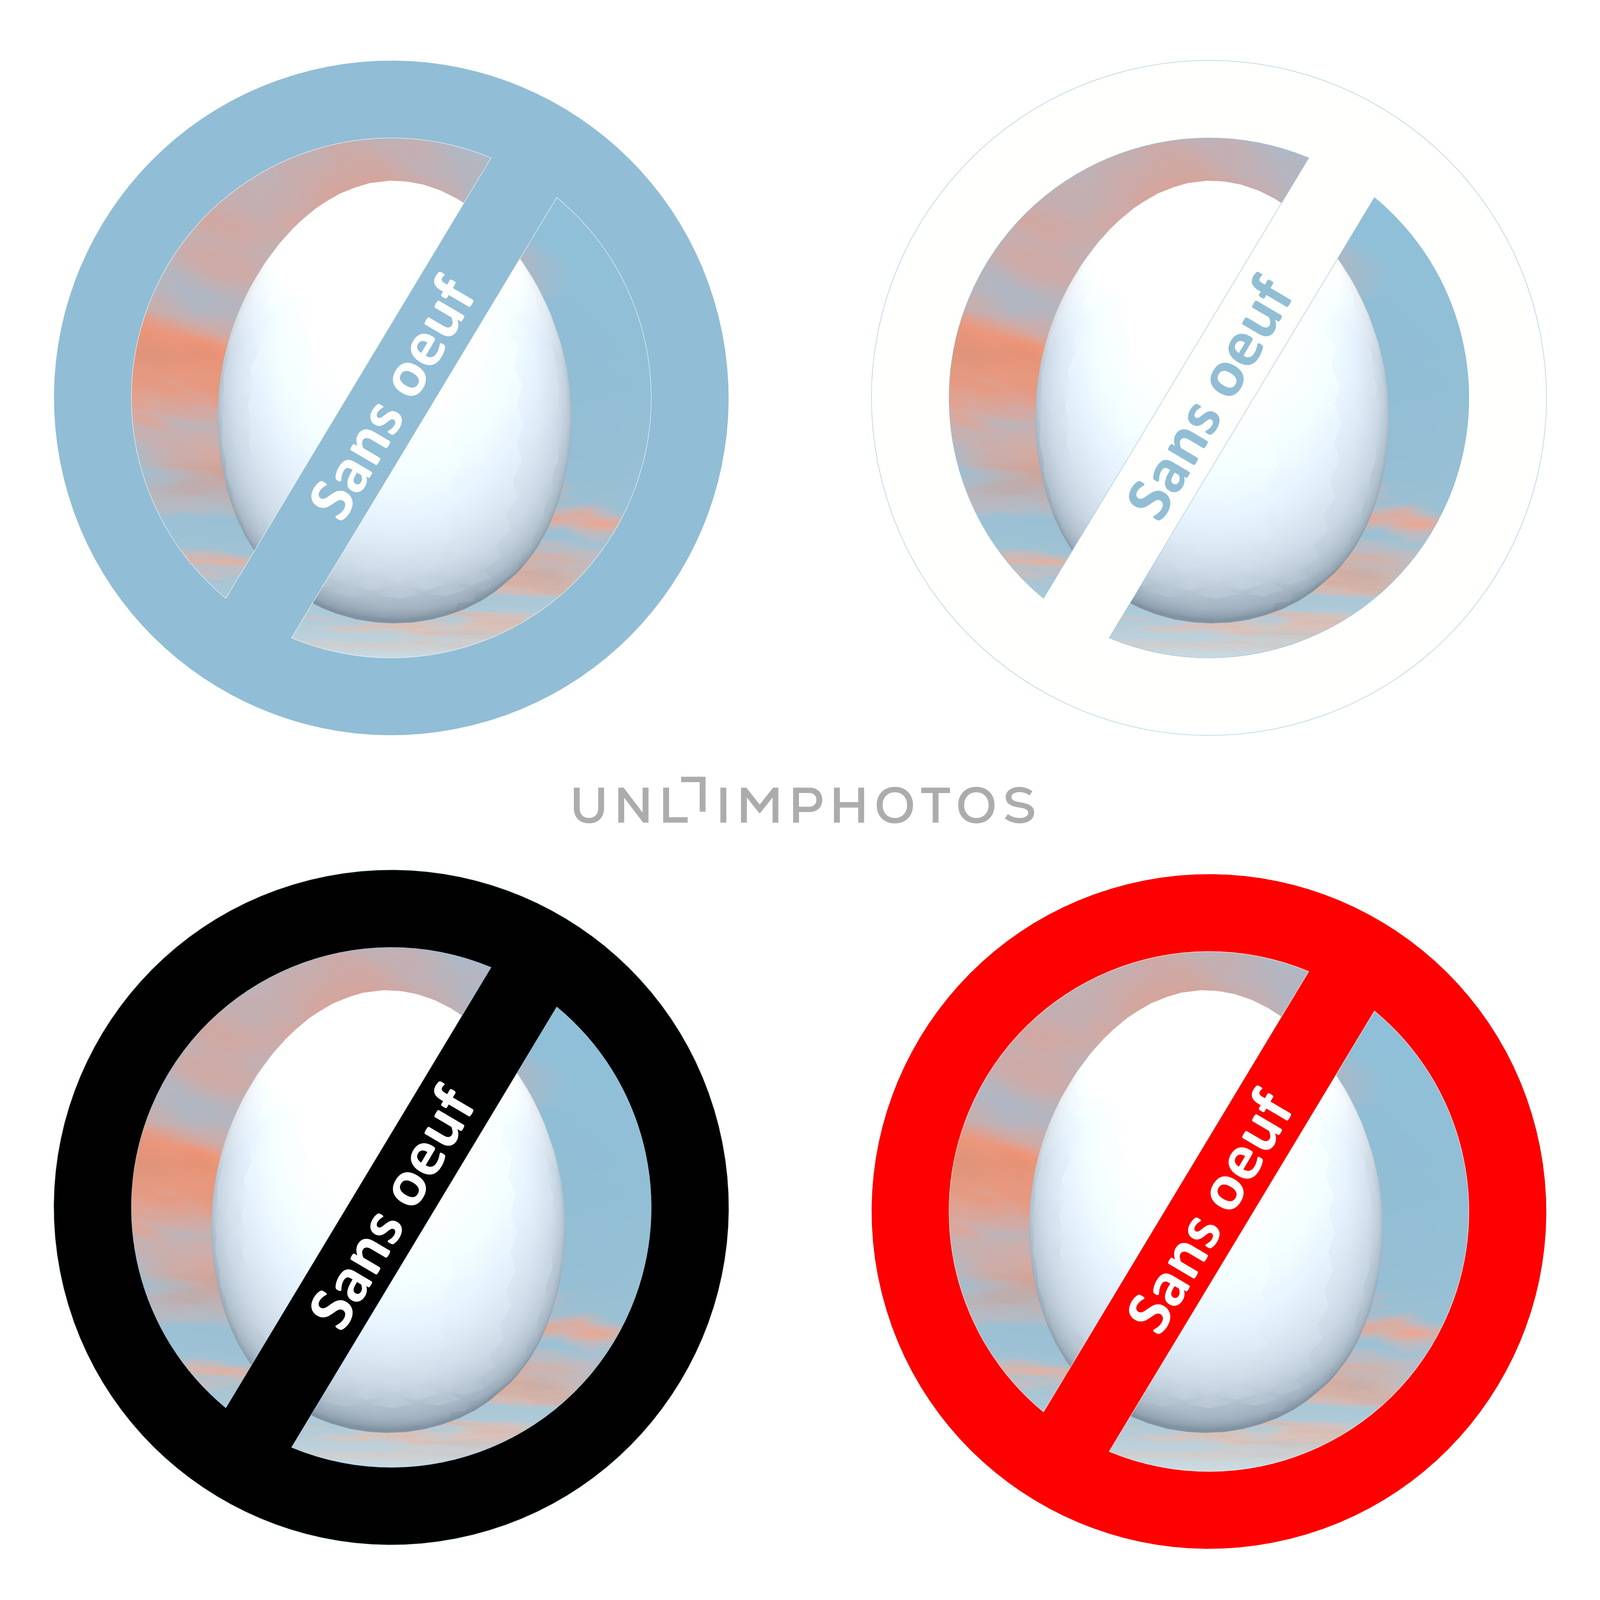 French stickers for egg free products by Elenaphotos21